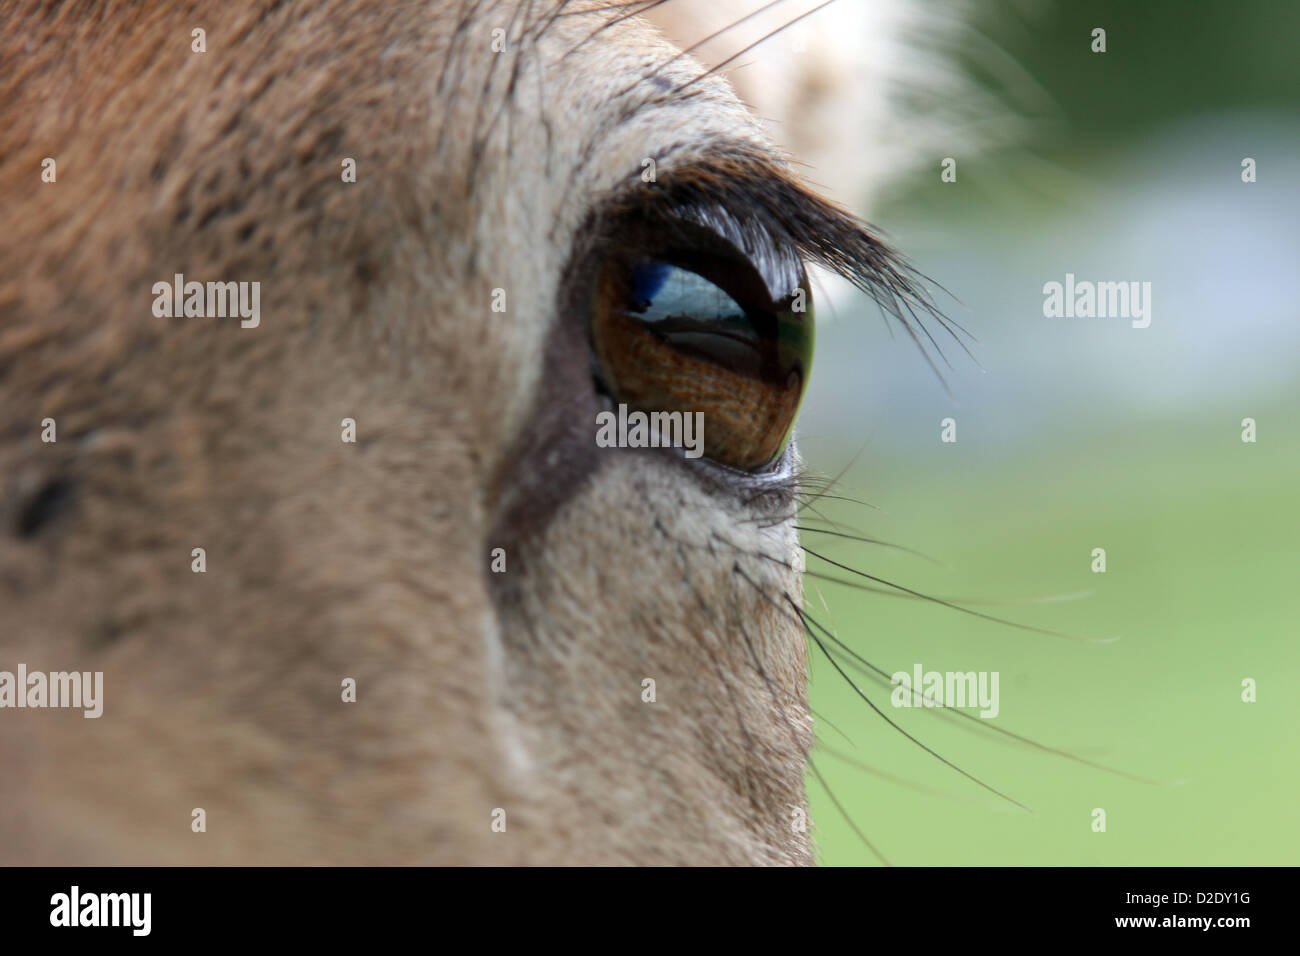 A close up view of a deer's eye showing long lashes and brown eye Stock Photo